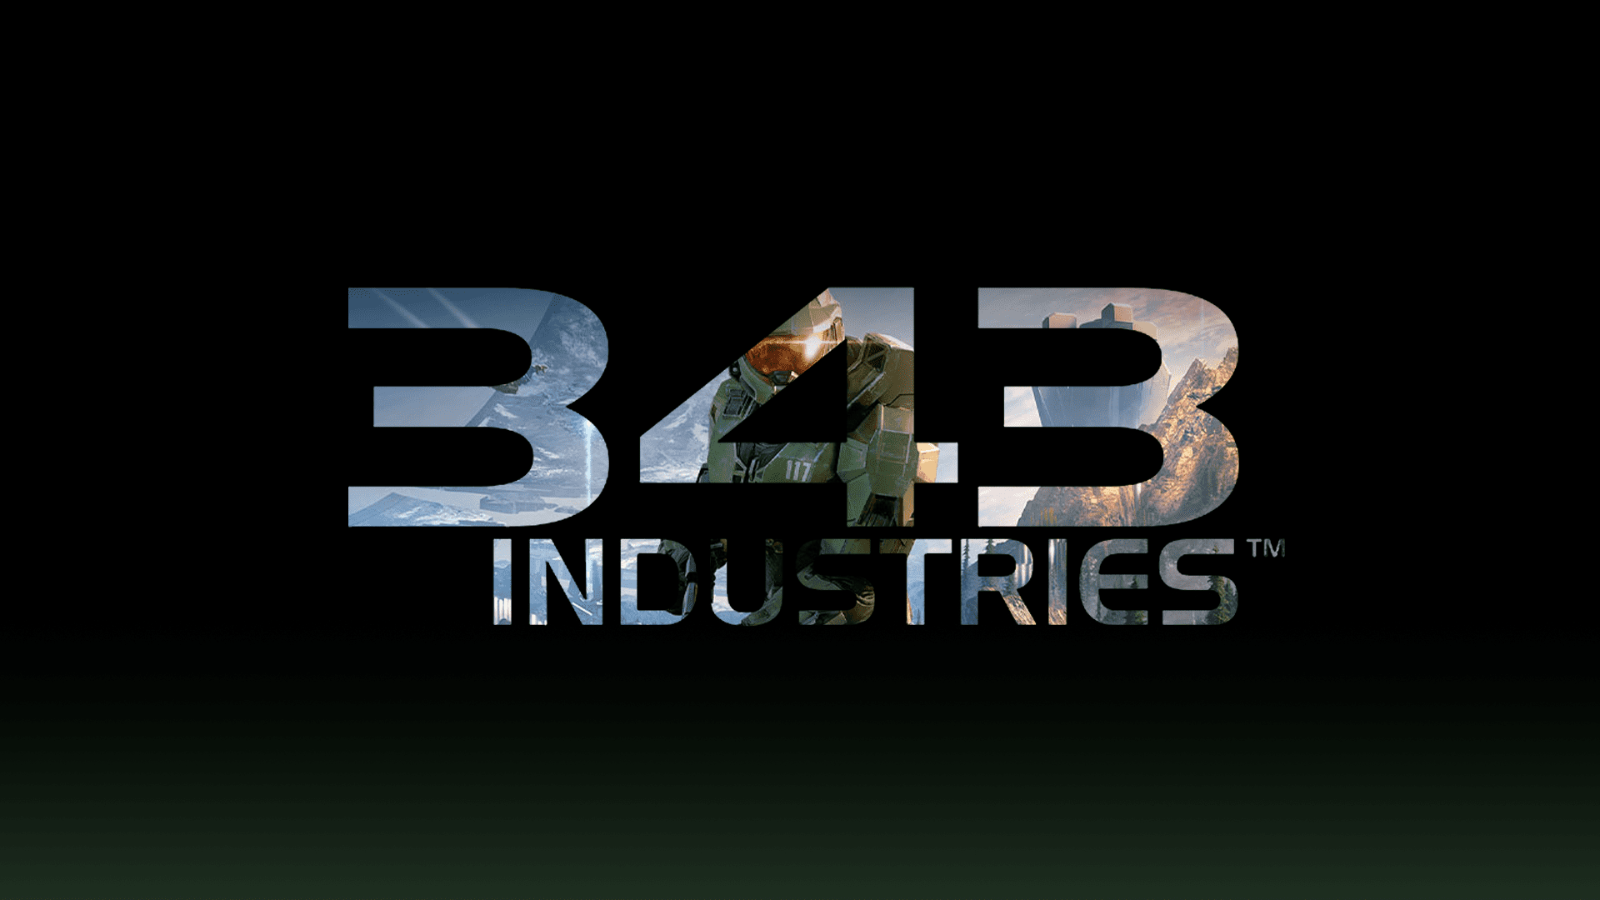 Logo image for 343 Industries with the Halo Infinite box art visible through the lettering.